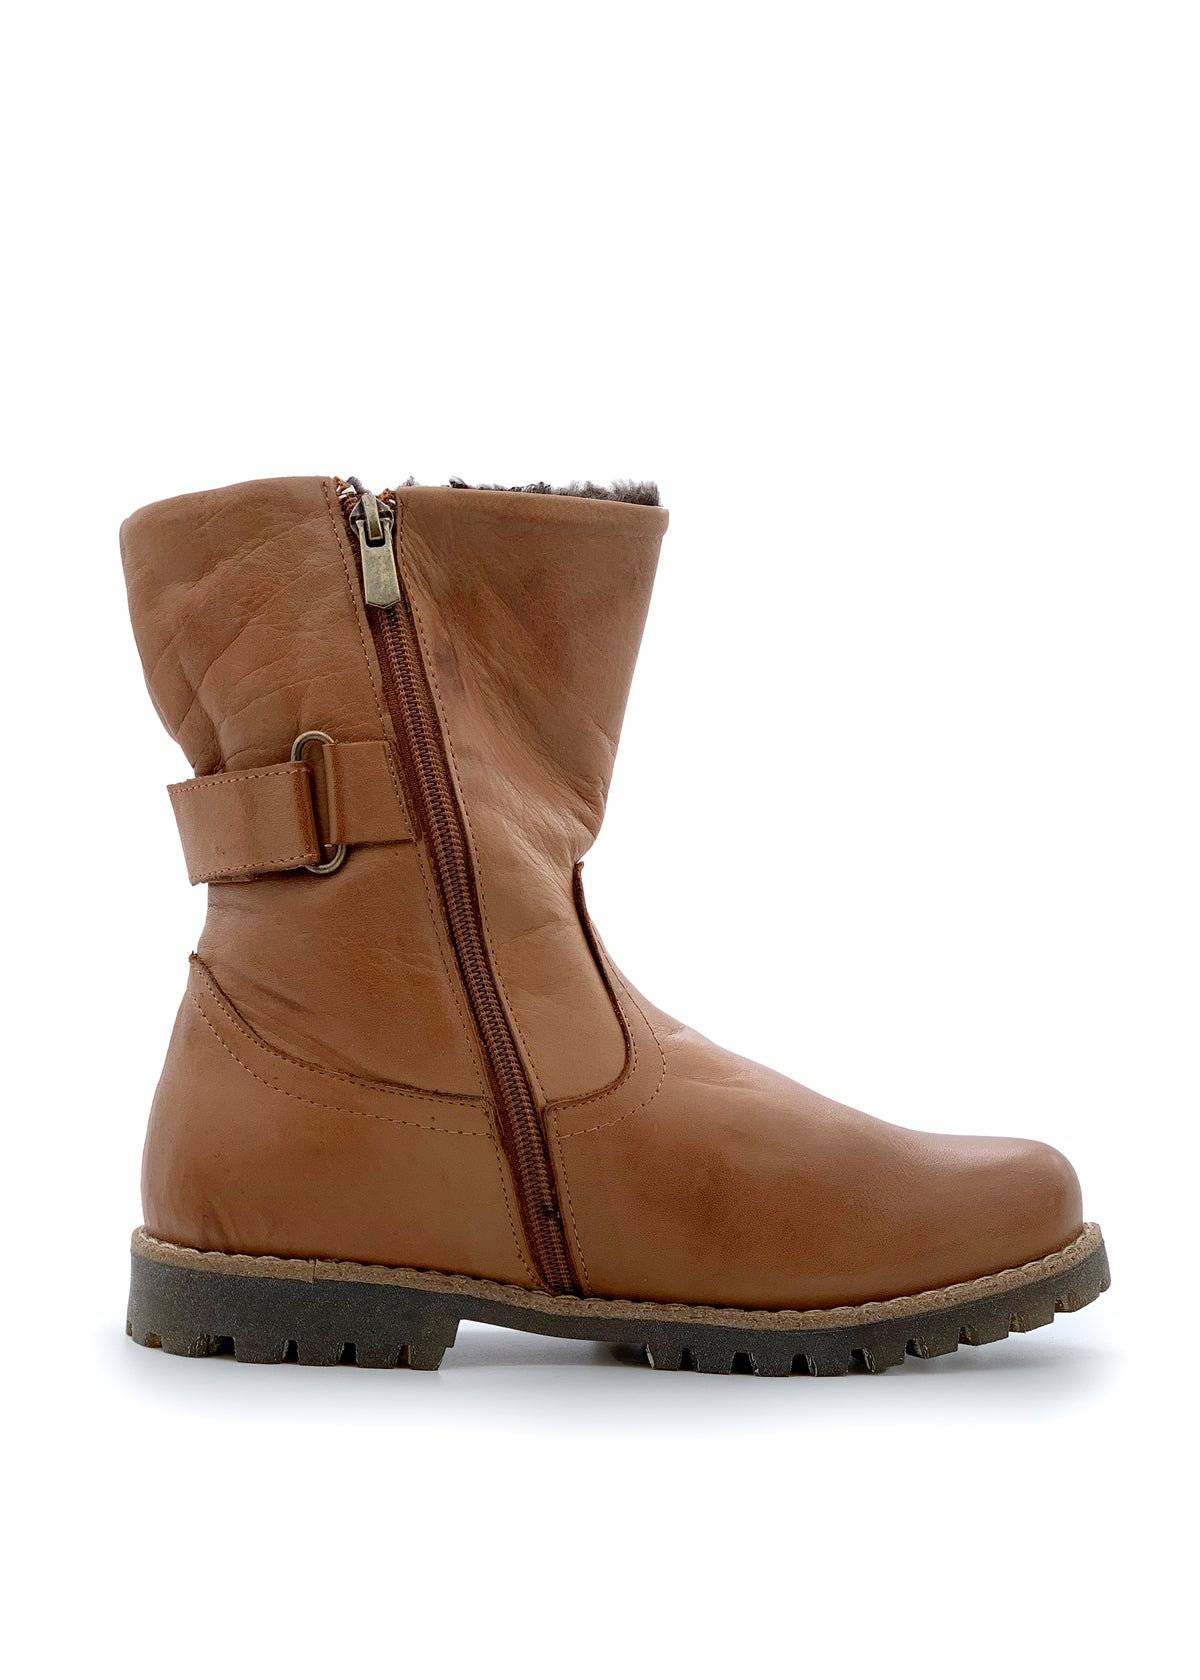 Winter ankle boots - cognac brown